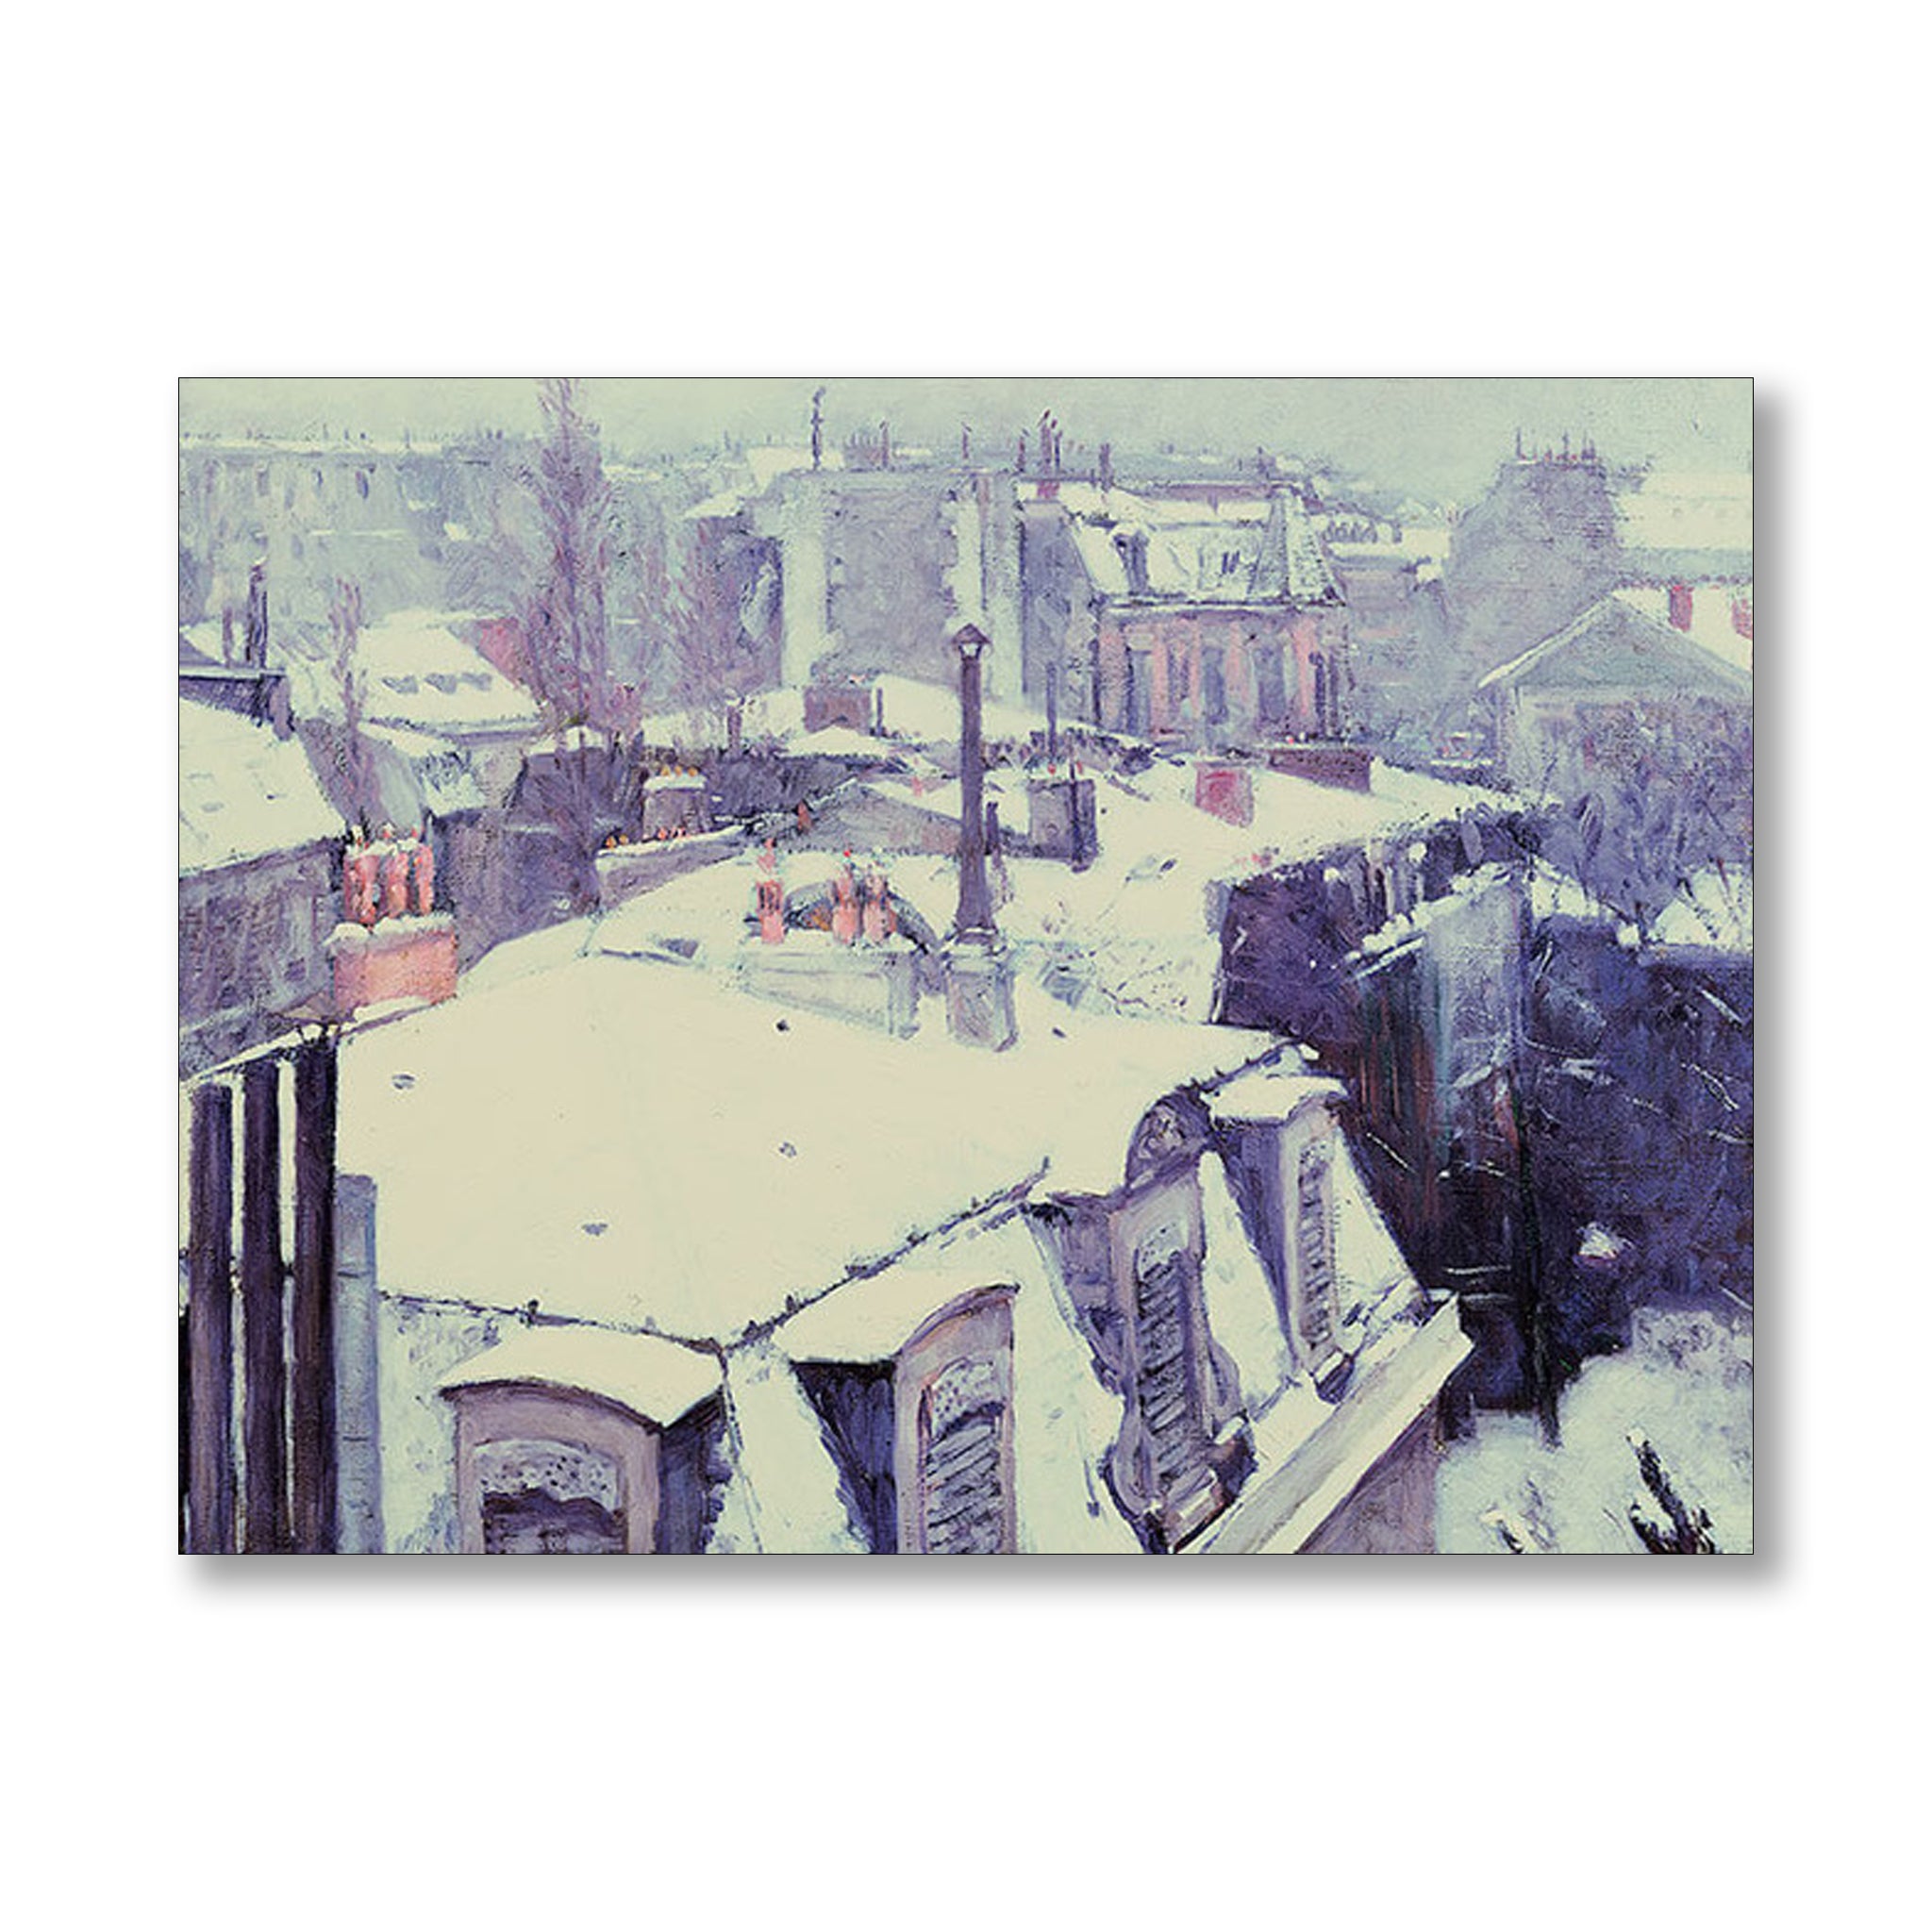 Roofs Under Snow 1878 by Gustave Caillebotte | Nicholas Engert Interiors